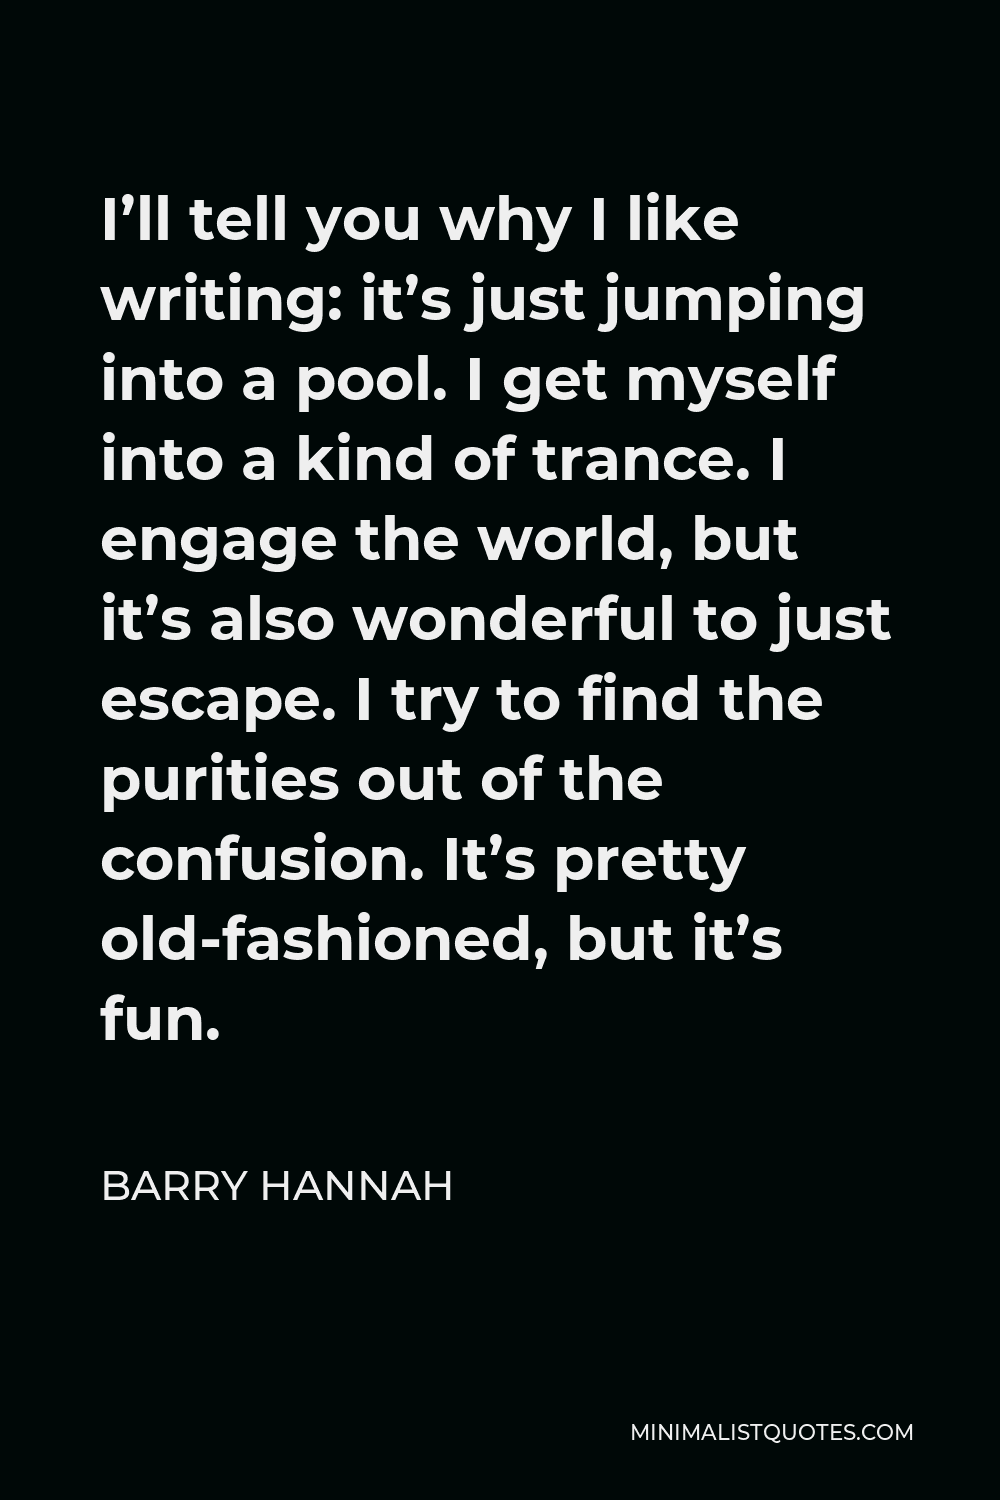 Barry Hannah Quote - I’ll tell you why I like writing: it’s just jumping into a pool. I get myself into a kind of trance. I engage the world, but it’s also wonderful to just escape. I try to find the purities out of the confusion. It’s pretty old-fashioned, but it’s fun.